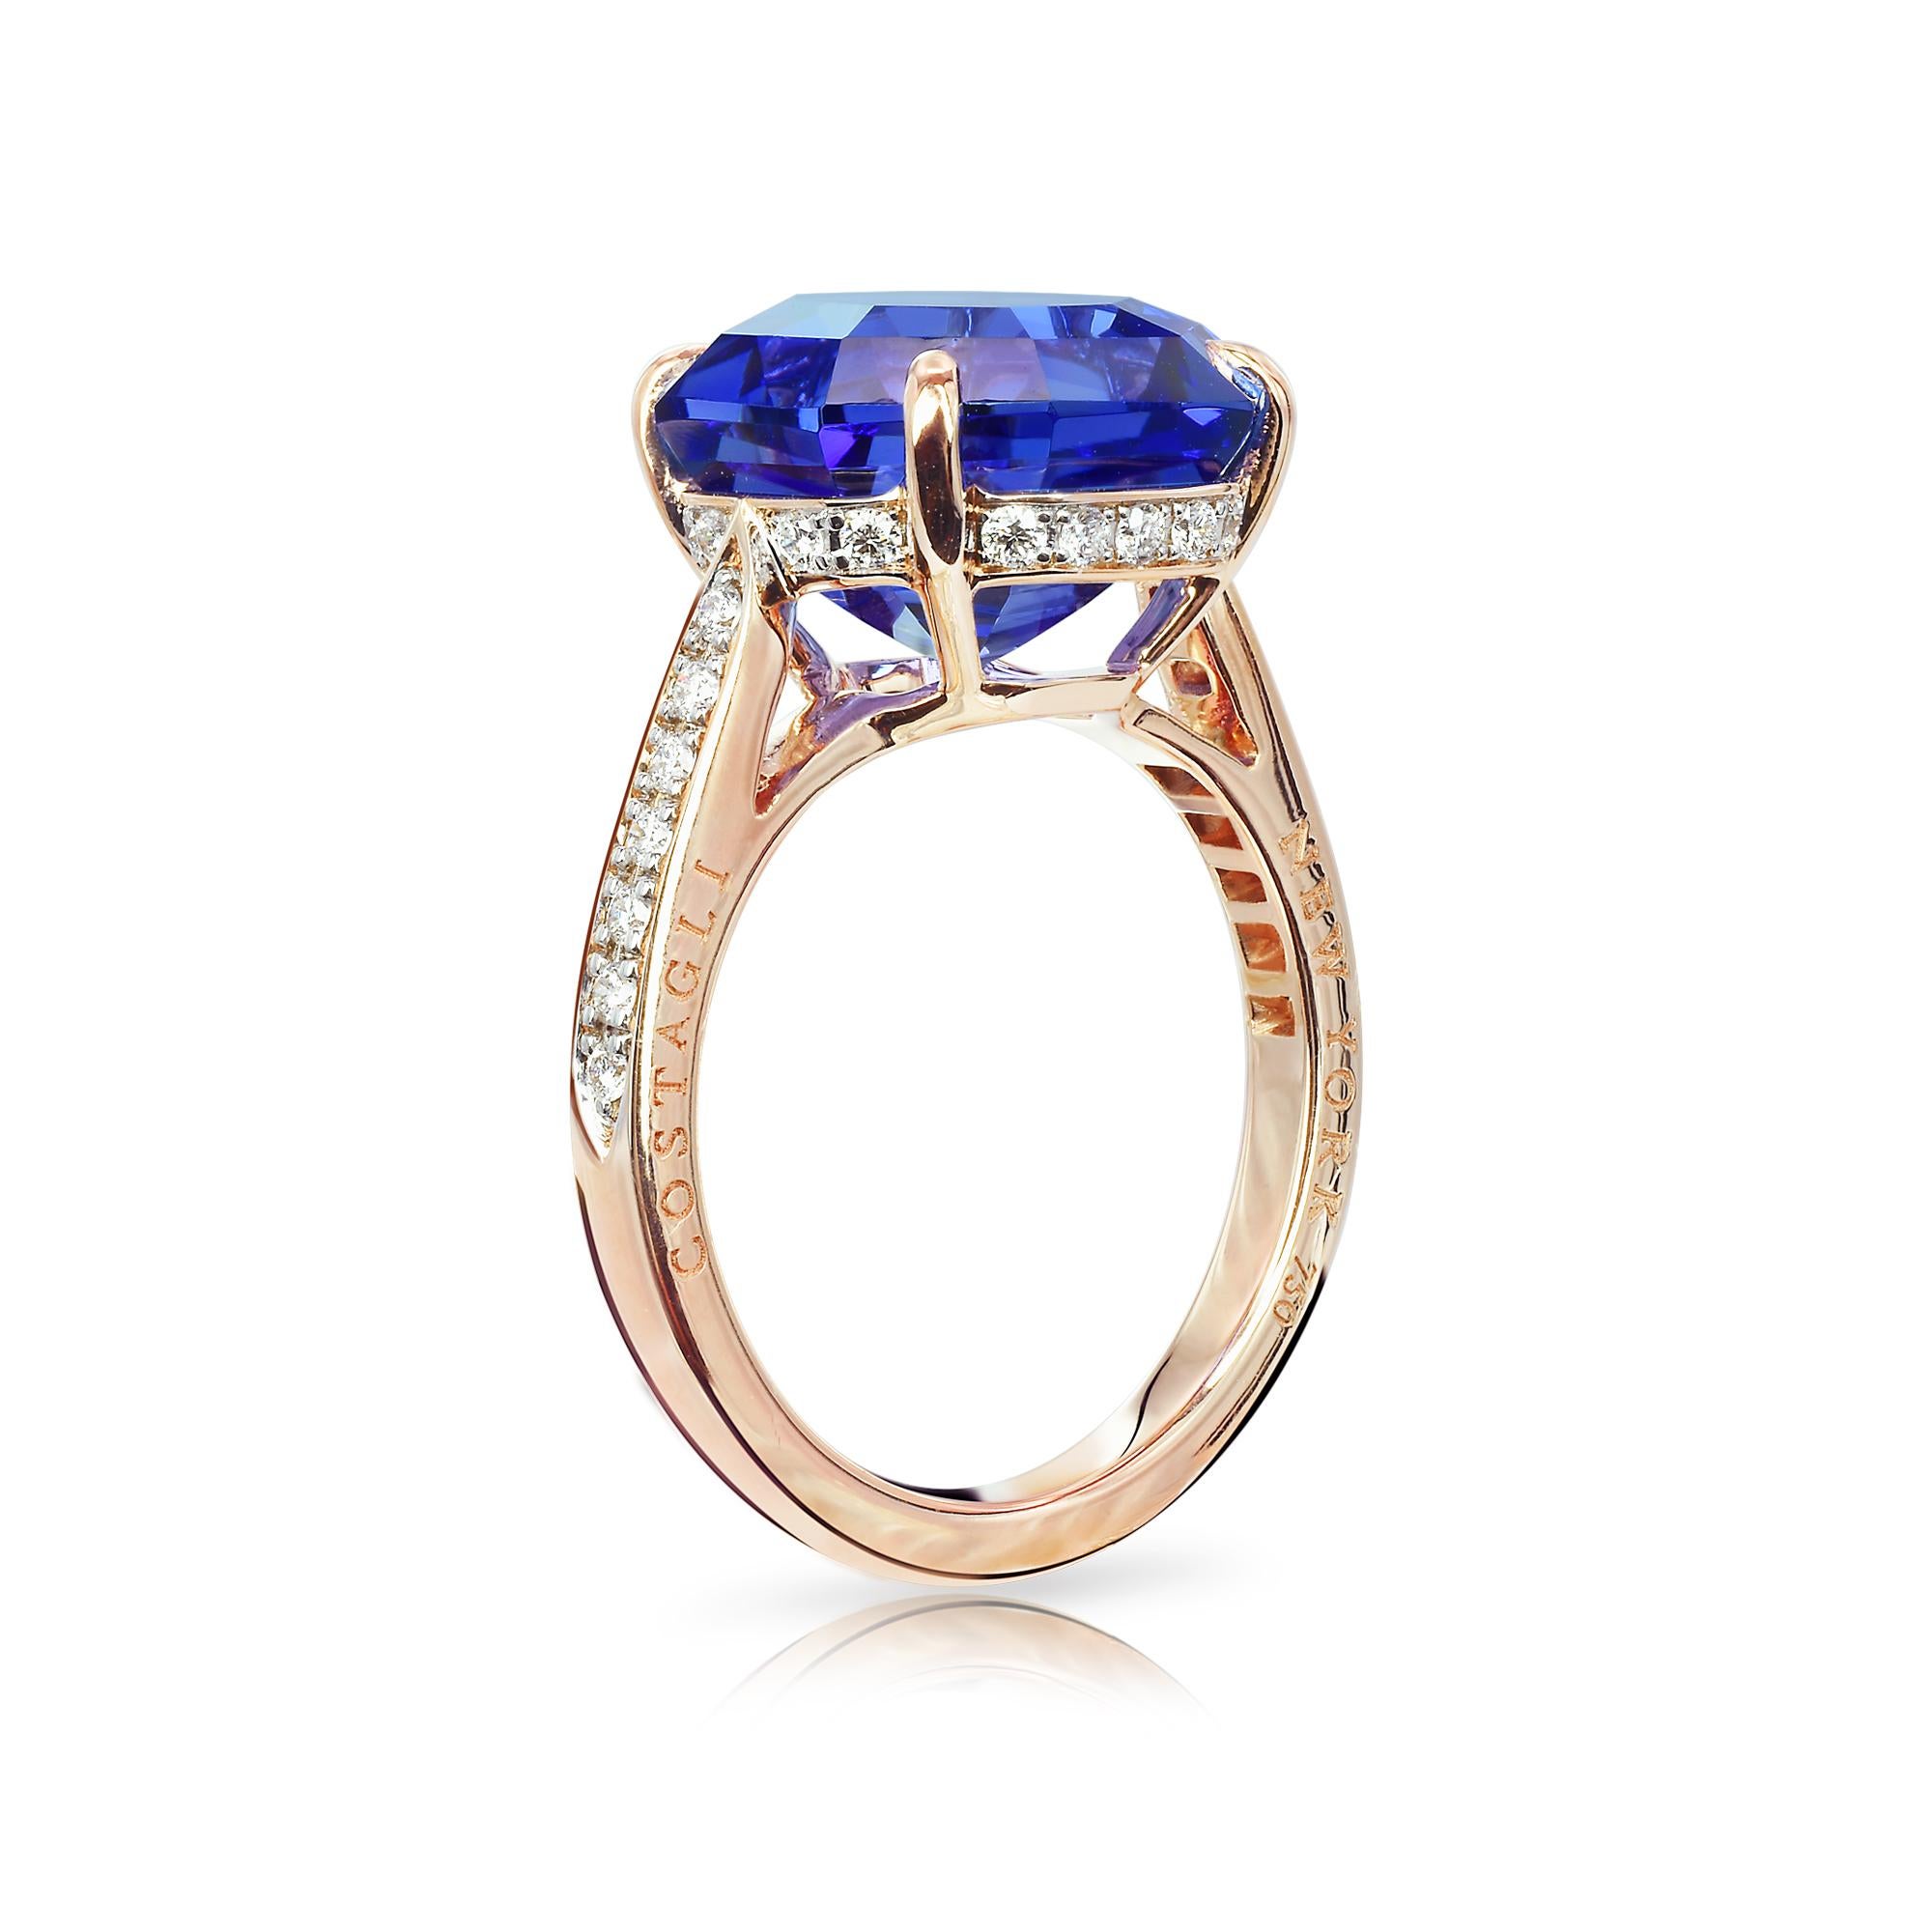 One-of-a-kind asscher-cut tanzanite ring set in 18 karat rose gold with pave-set round, brilliant diamonds. 

A very clean look is the base of this asscher-cut tanzanite ring. Worn as a right hand ring or as a non-diamond engagement ring, it's